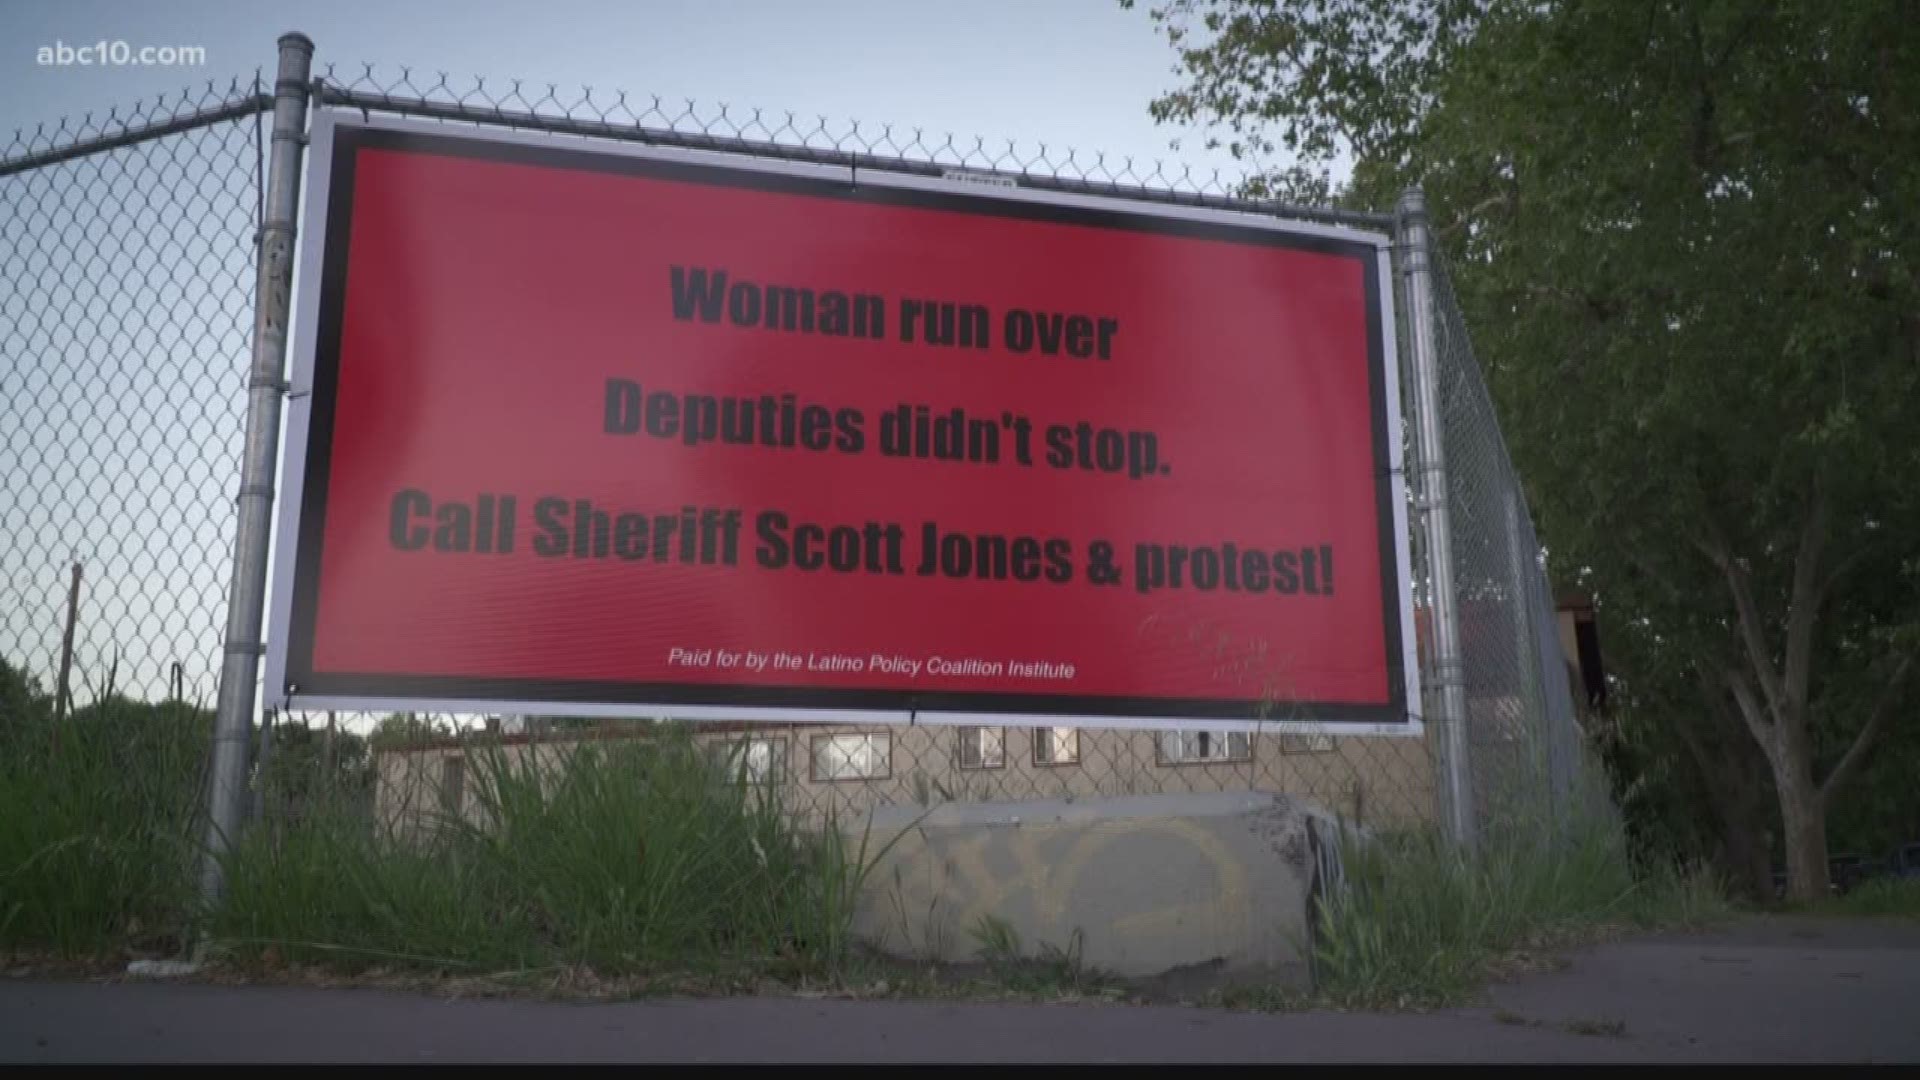 Large, bright orange signs calling out Sacramento County Sheriff Scott Jones have quietly popped up around Sacramento over the past week.